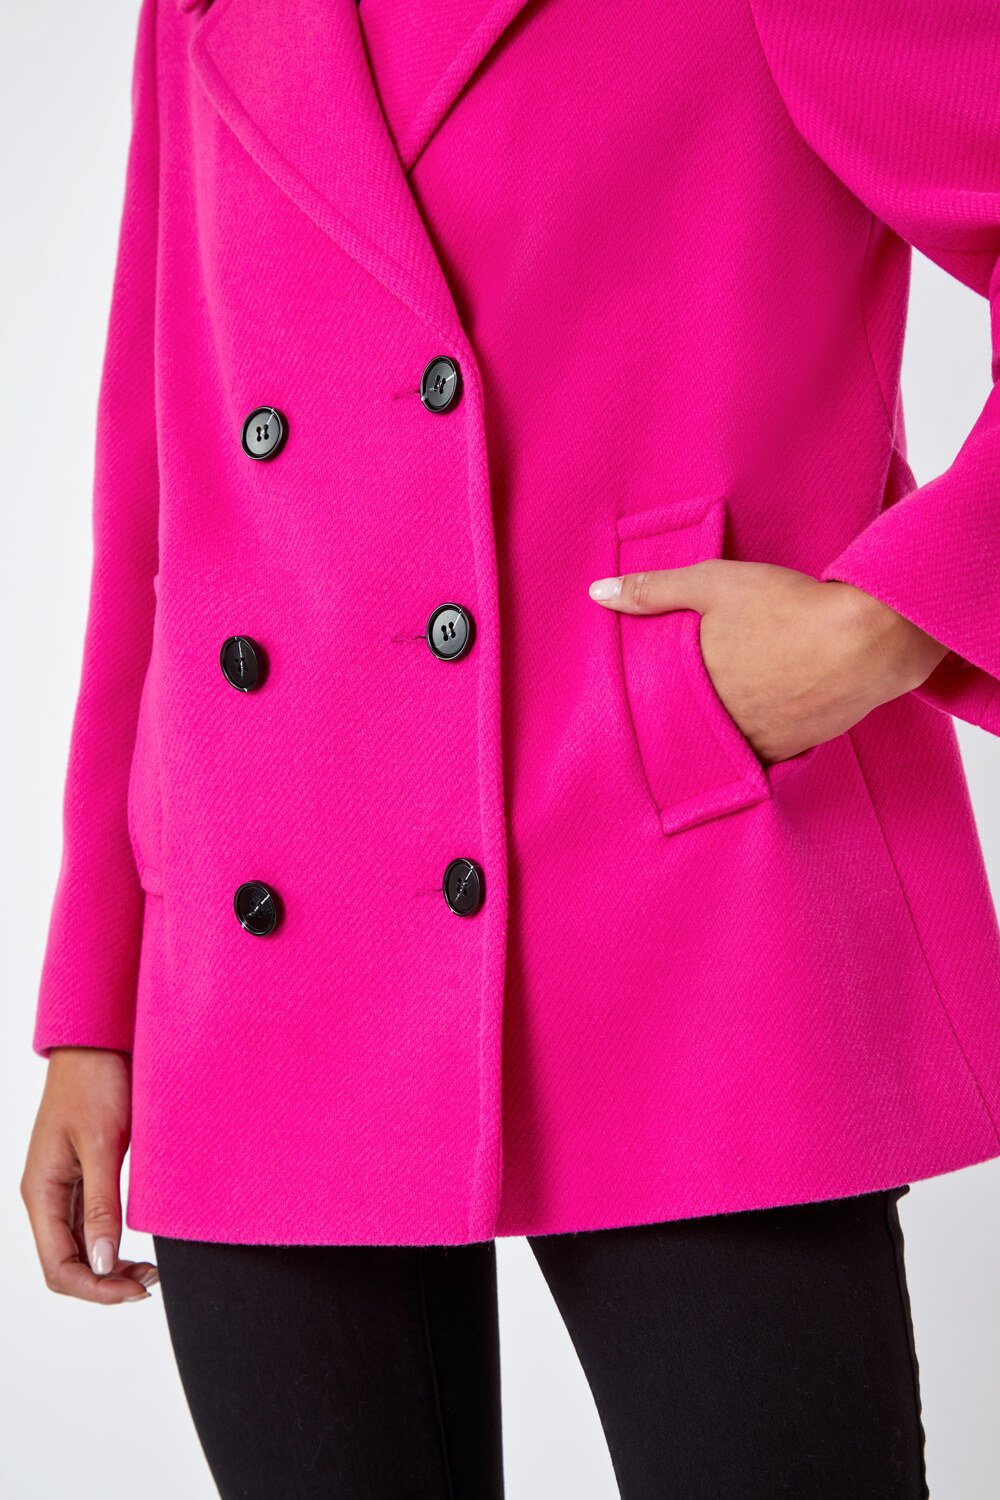 PINK Petite Double Breasted Smart Coat, Image 5 of 5